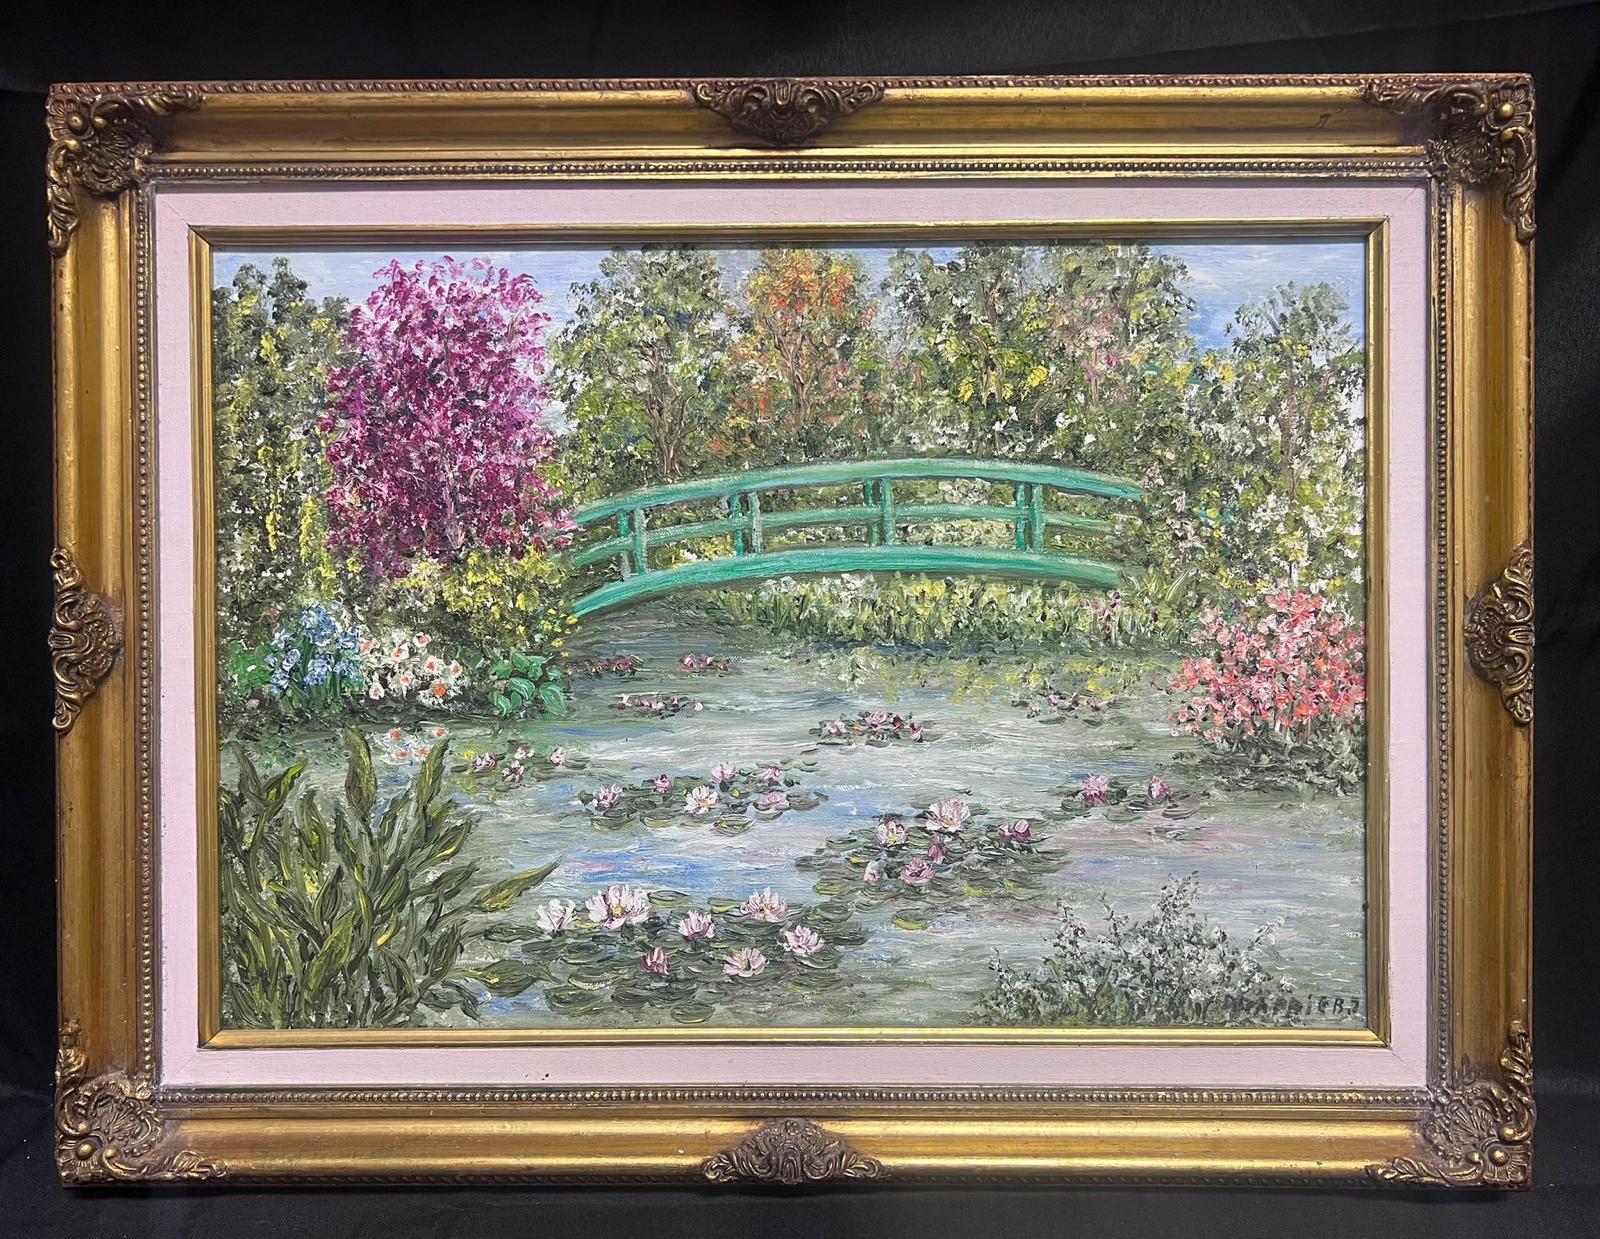 B. Rigaudiere Landscape Painting - Japanese Bridge Monet's Waterlily Pond Giverny Signed French Impressionist Oil